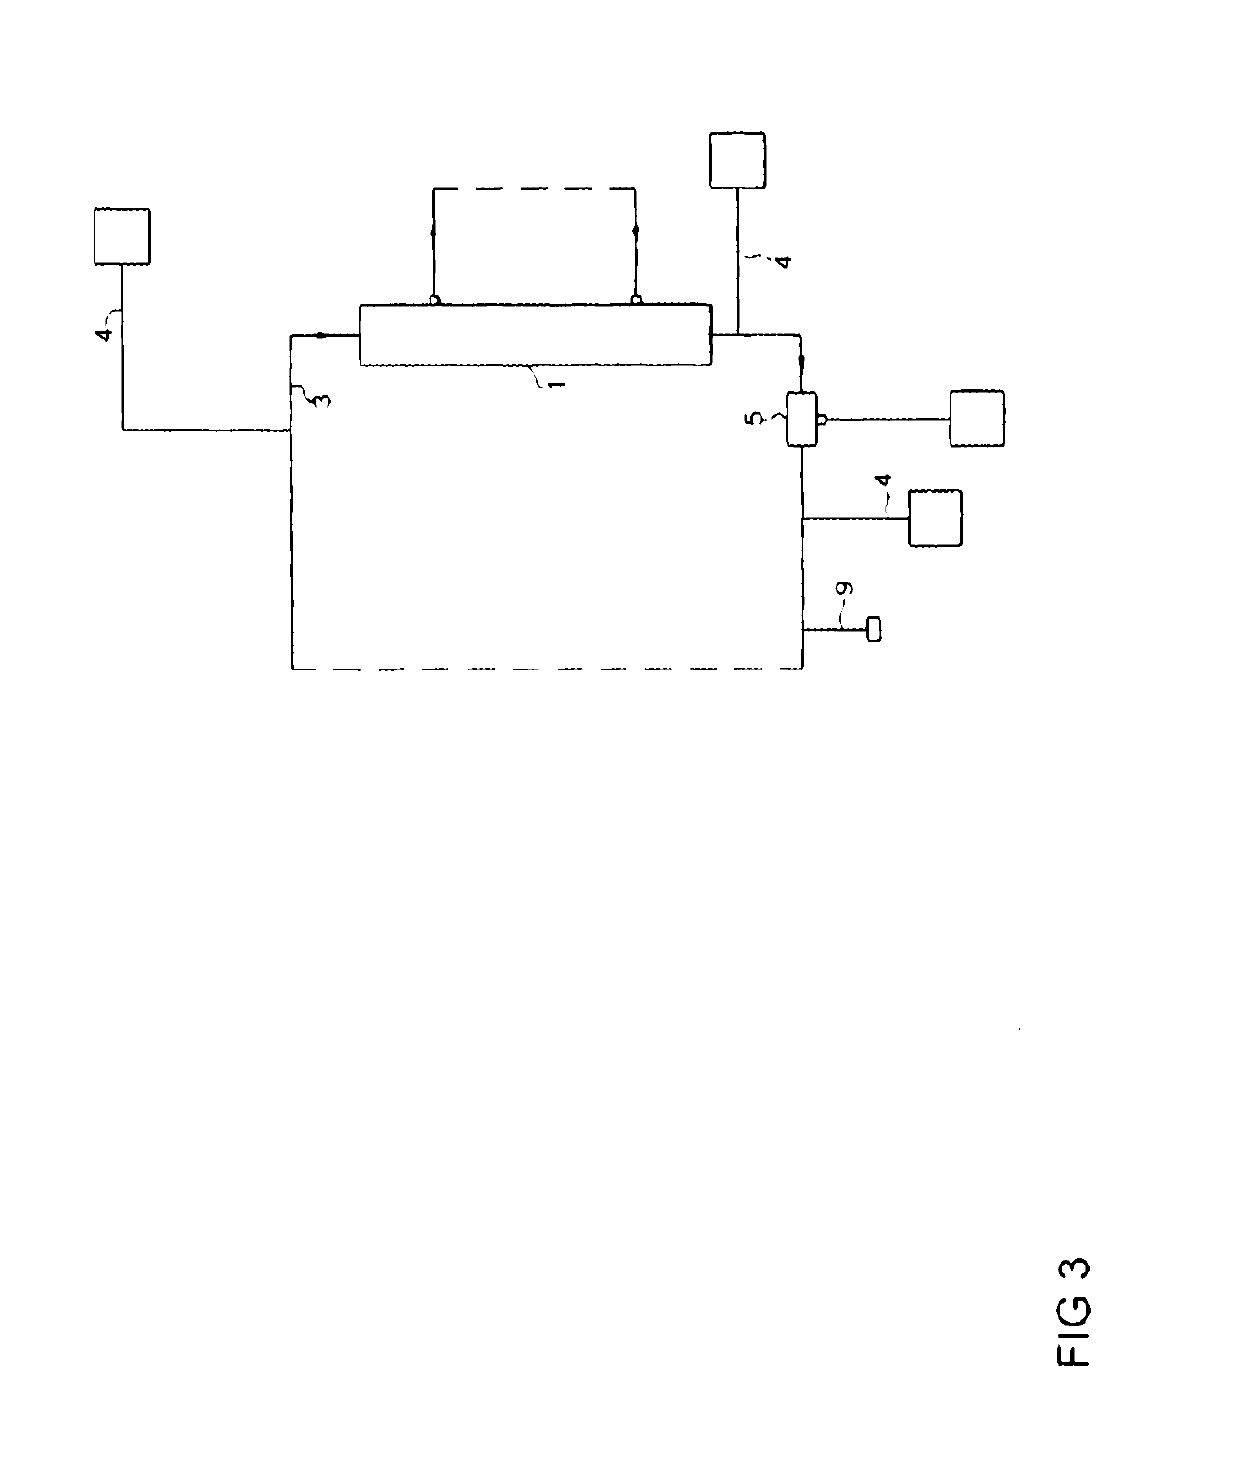 Systems or apparatuses and methods for performing dialysis